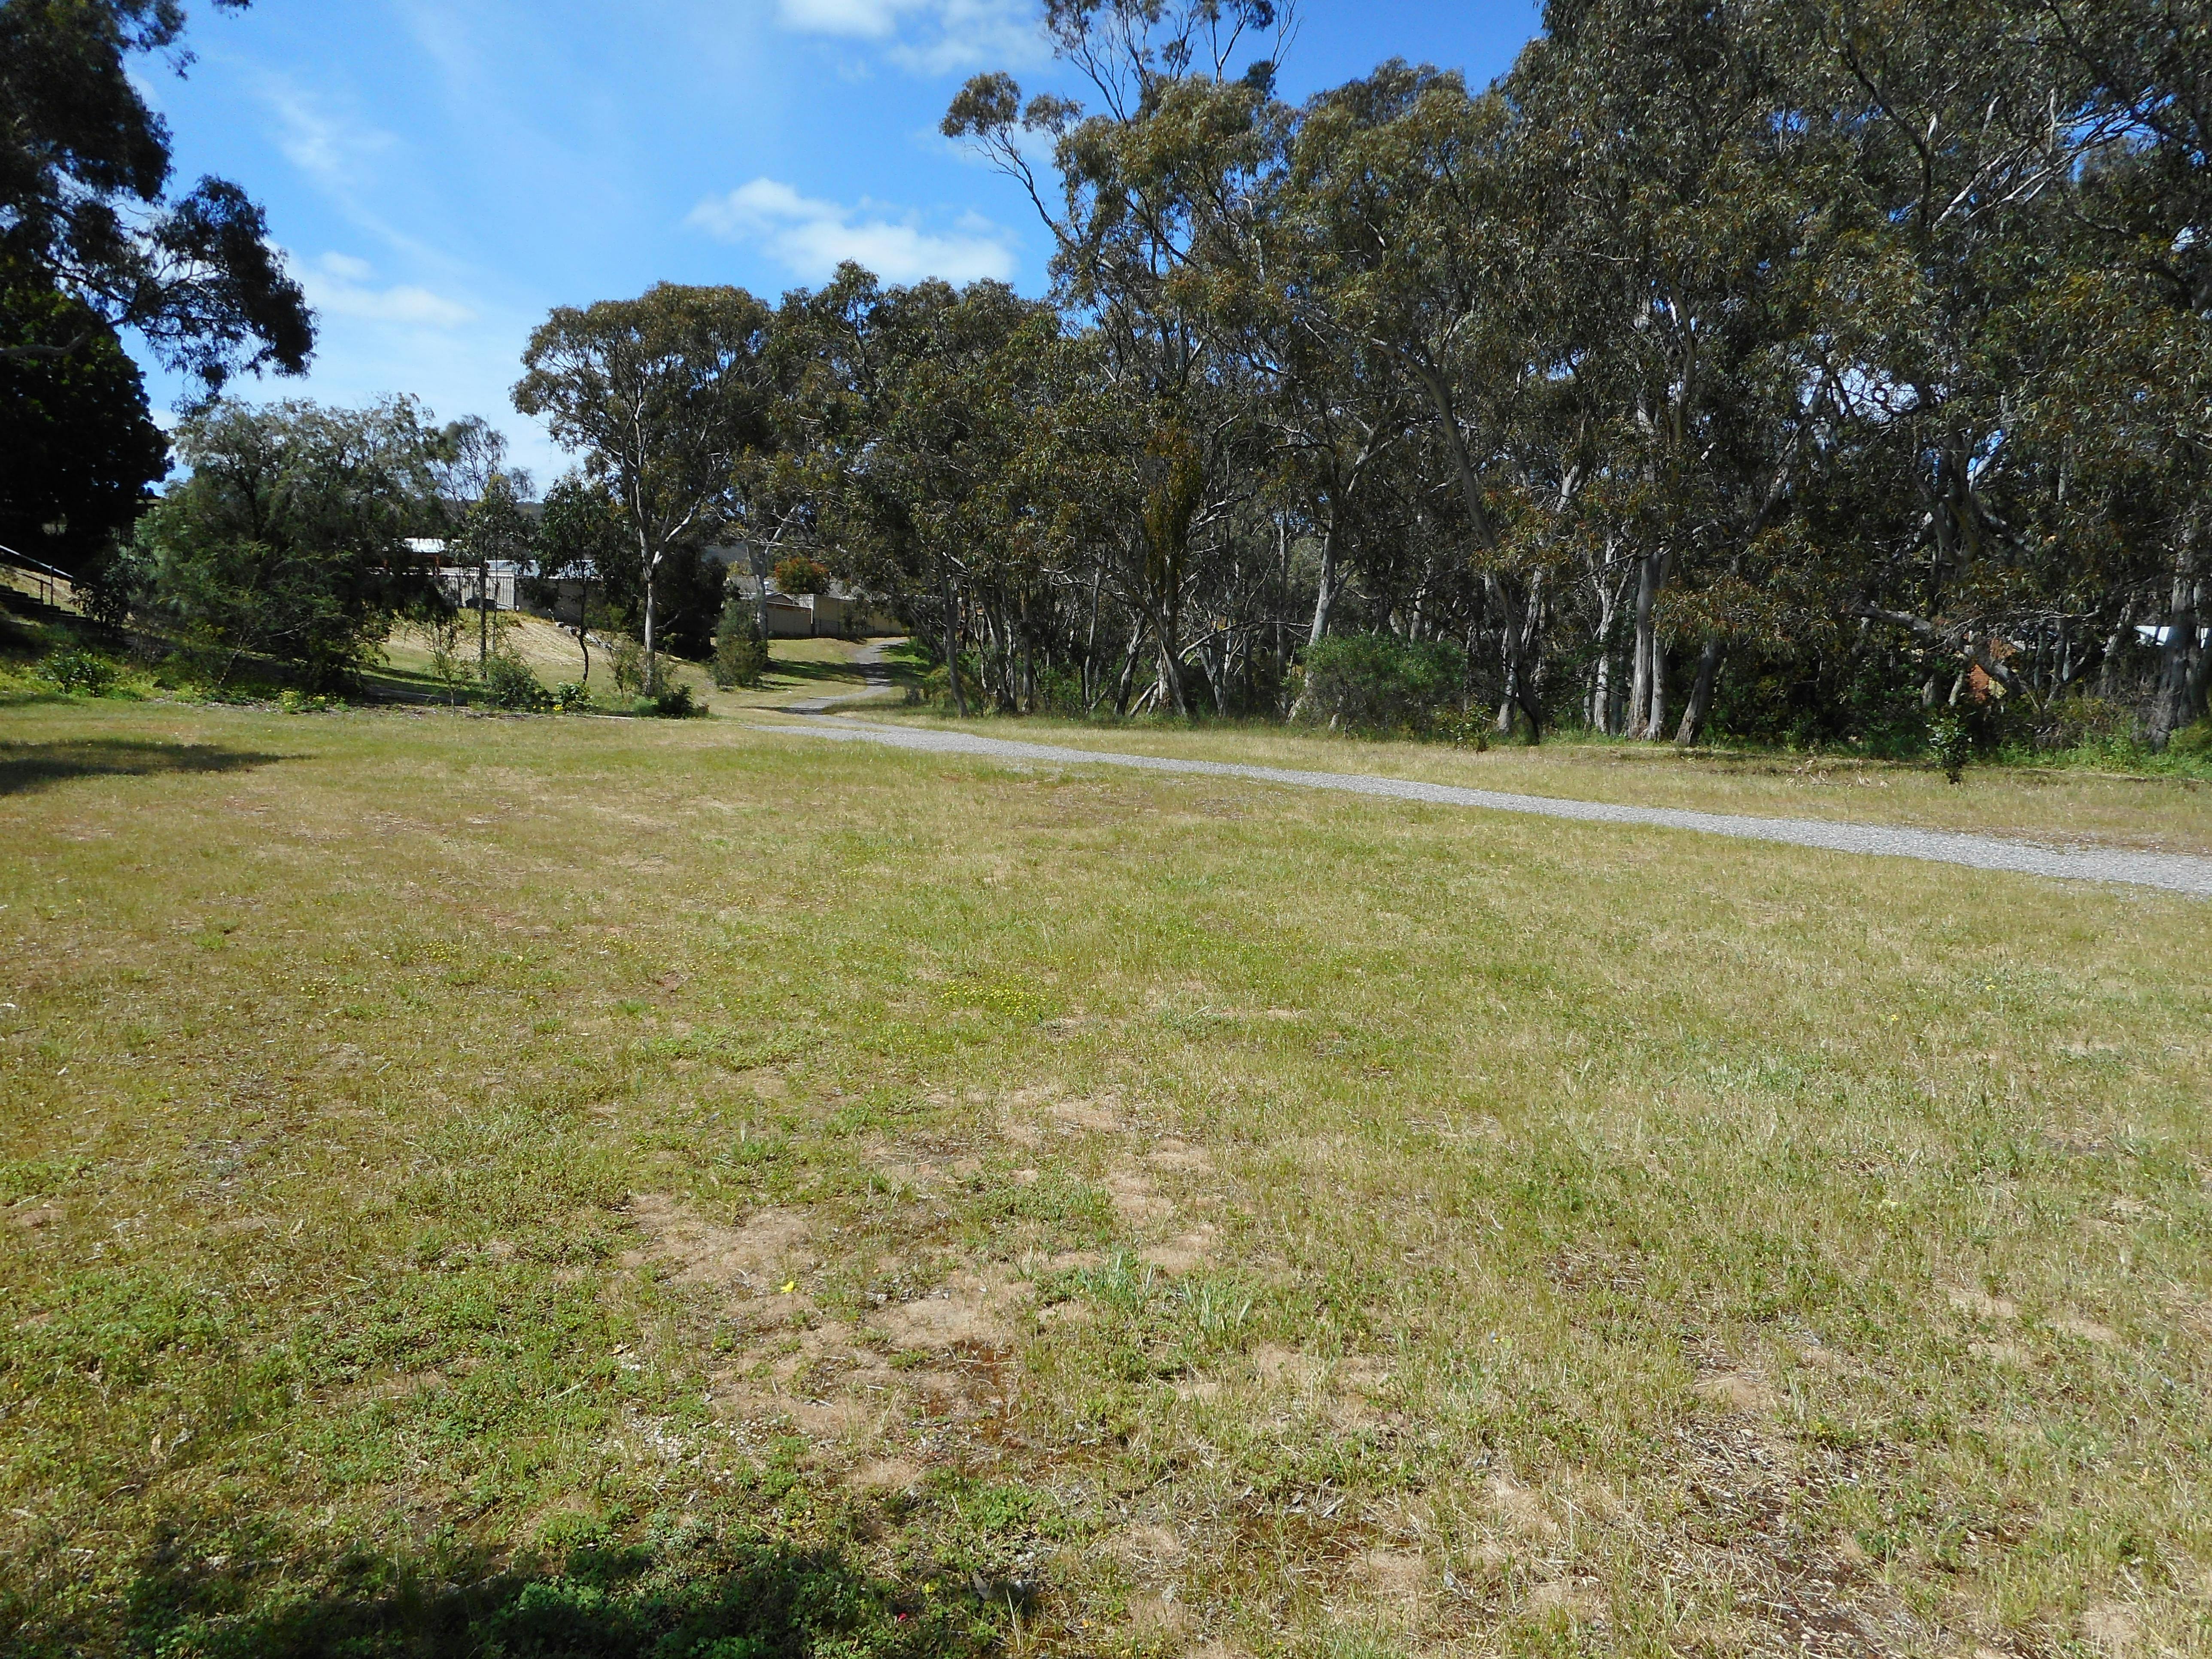 View of Kaplan Reserve in St Agnes from the end of Uthwatt Court, showing open space, path and trees